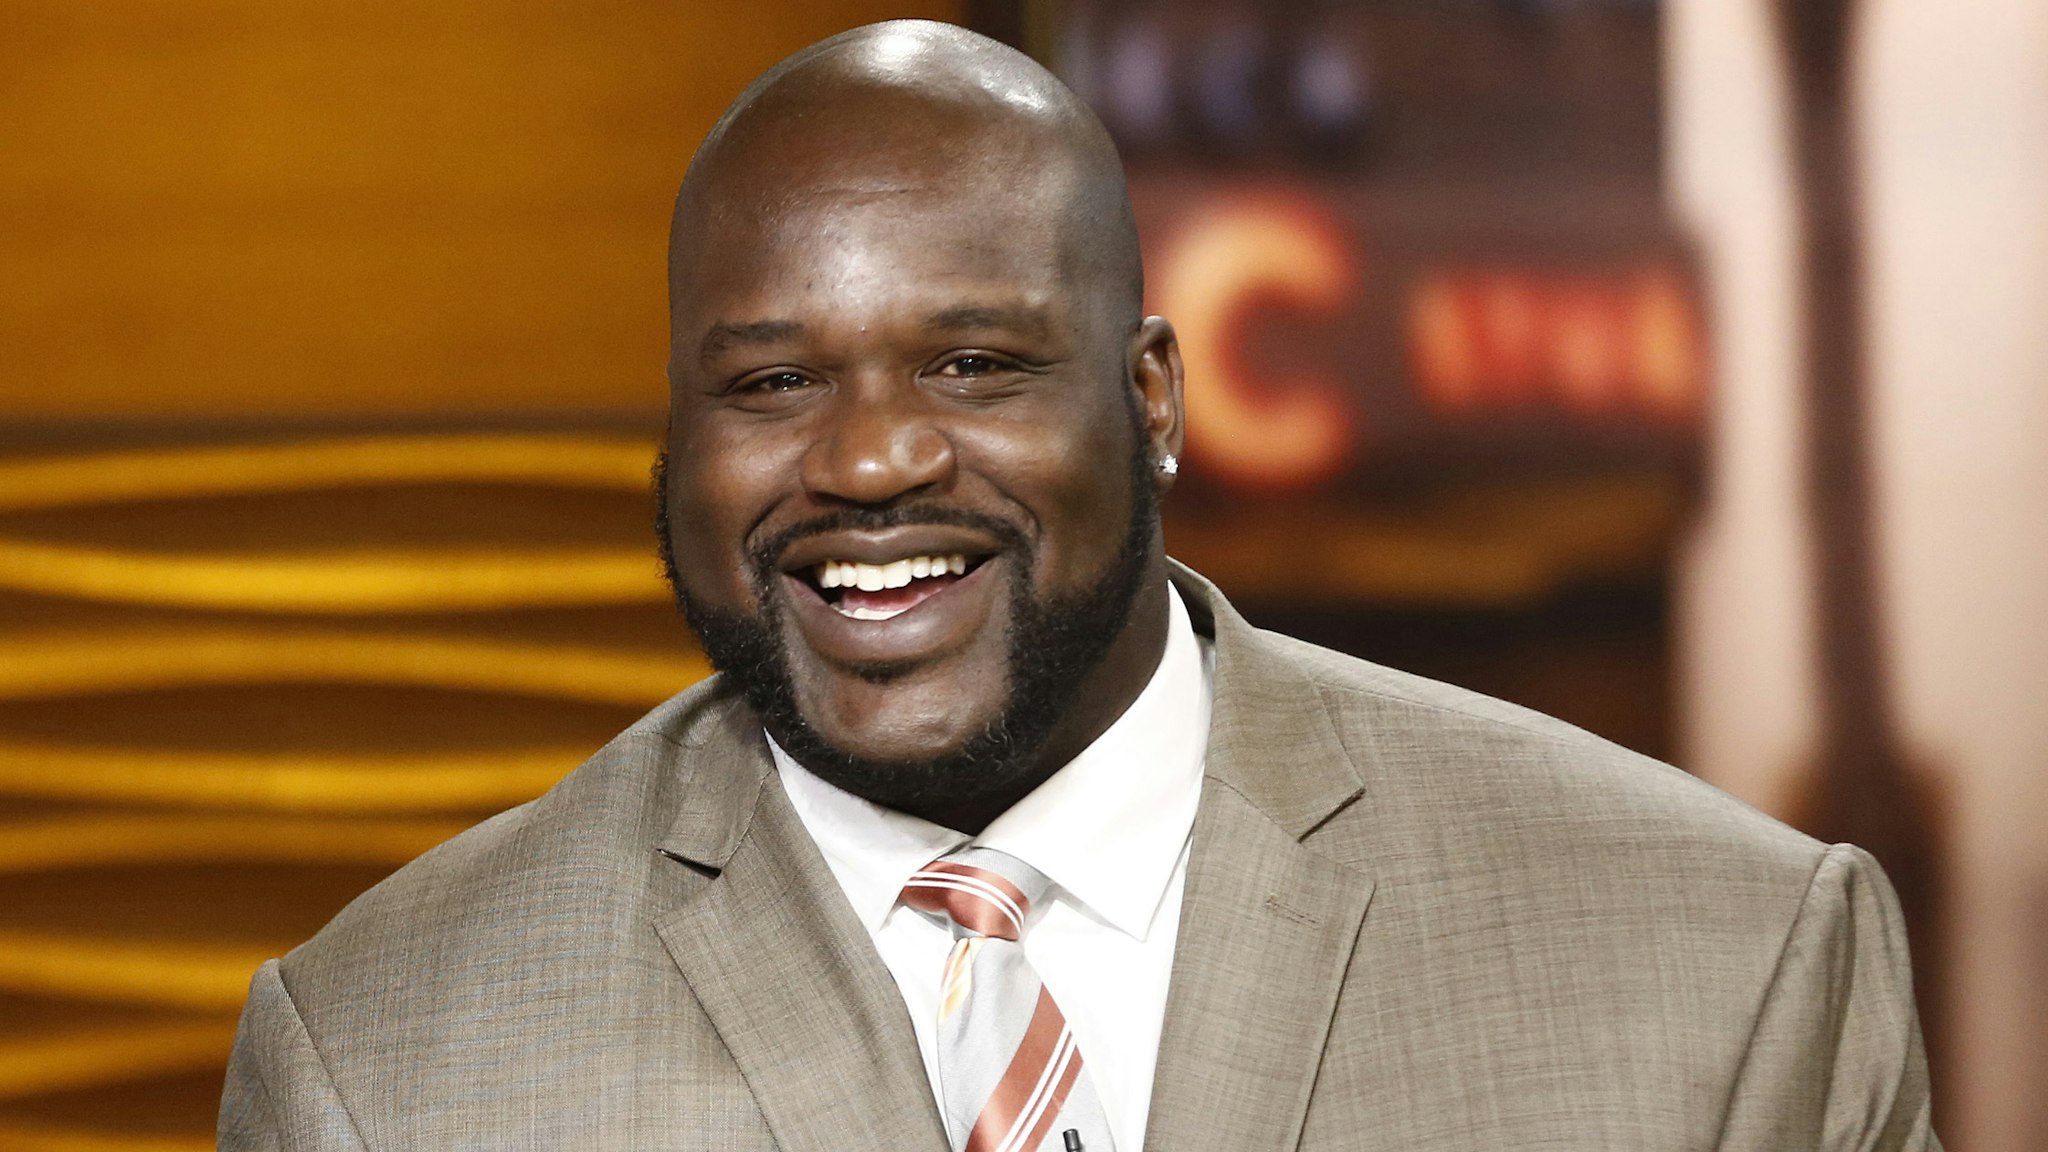 Shaquille O'Neal appears on NBC News' "Today" show